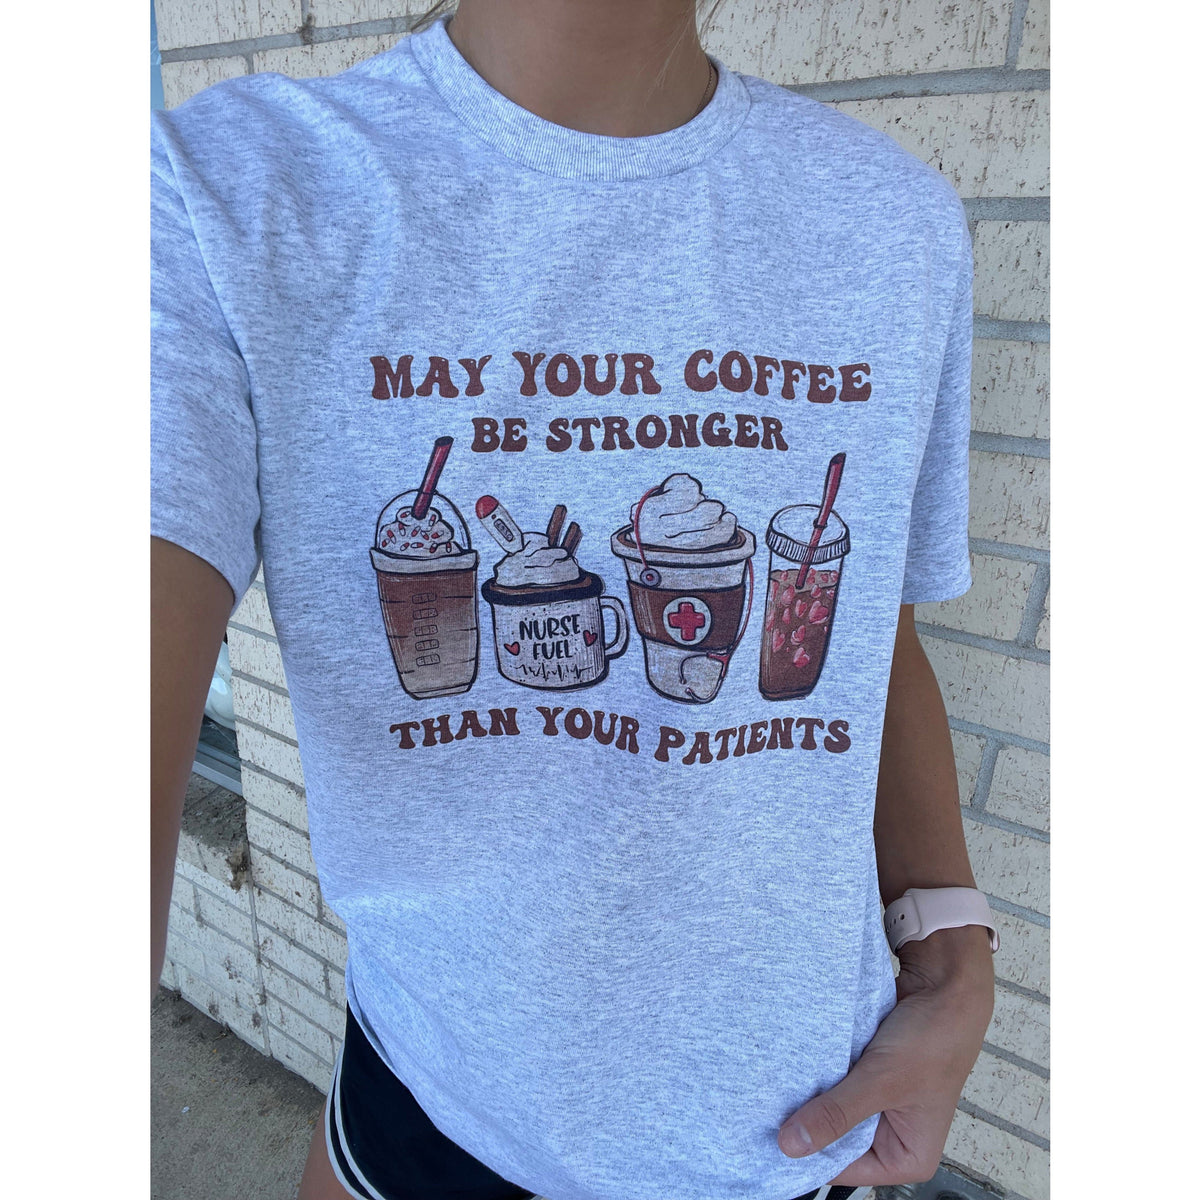 May your Coffee be stronger than your patients nurse tee or sweatshirt